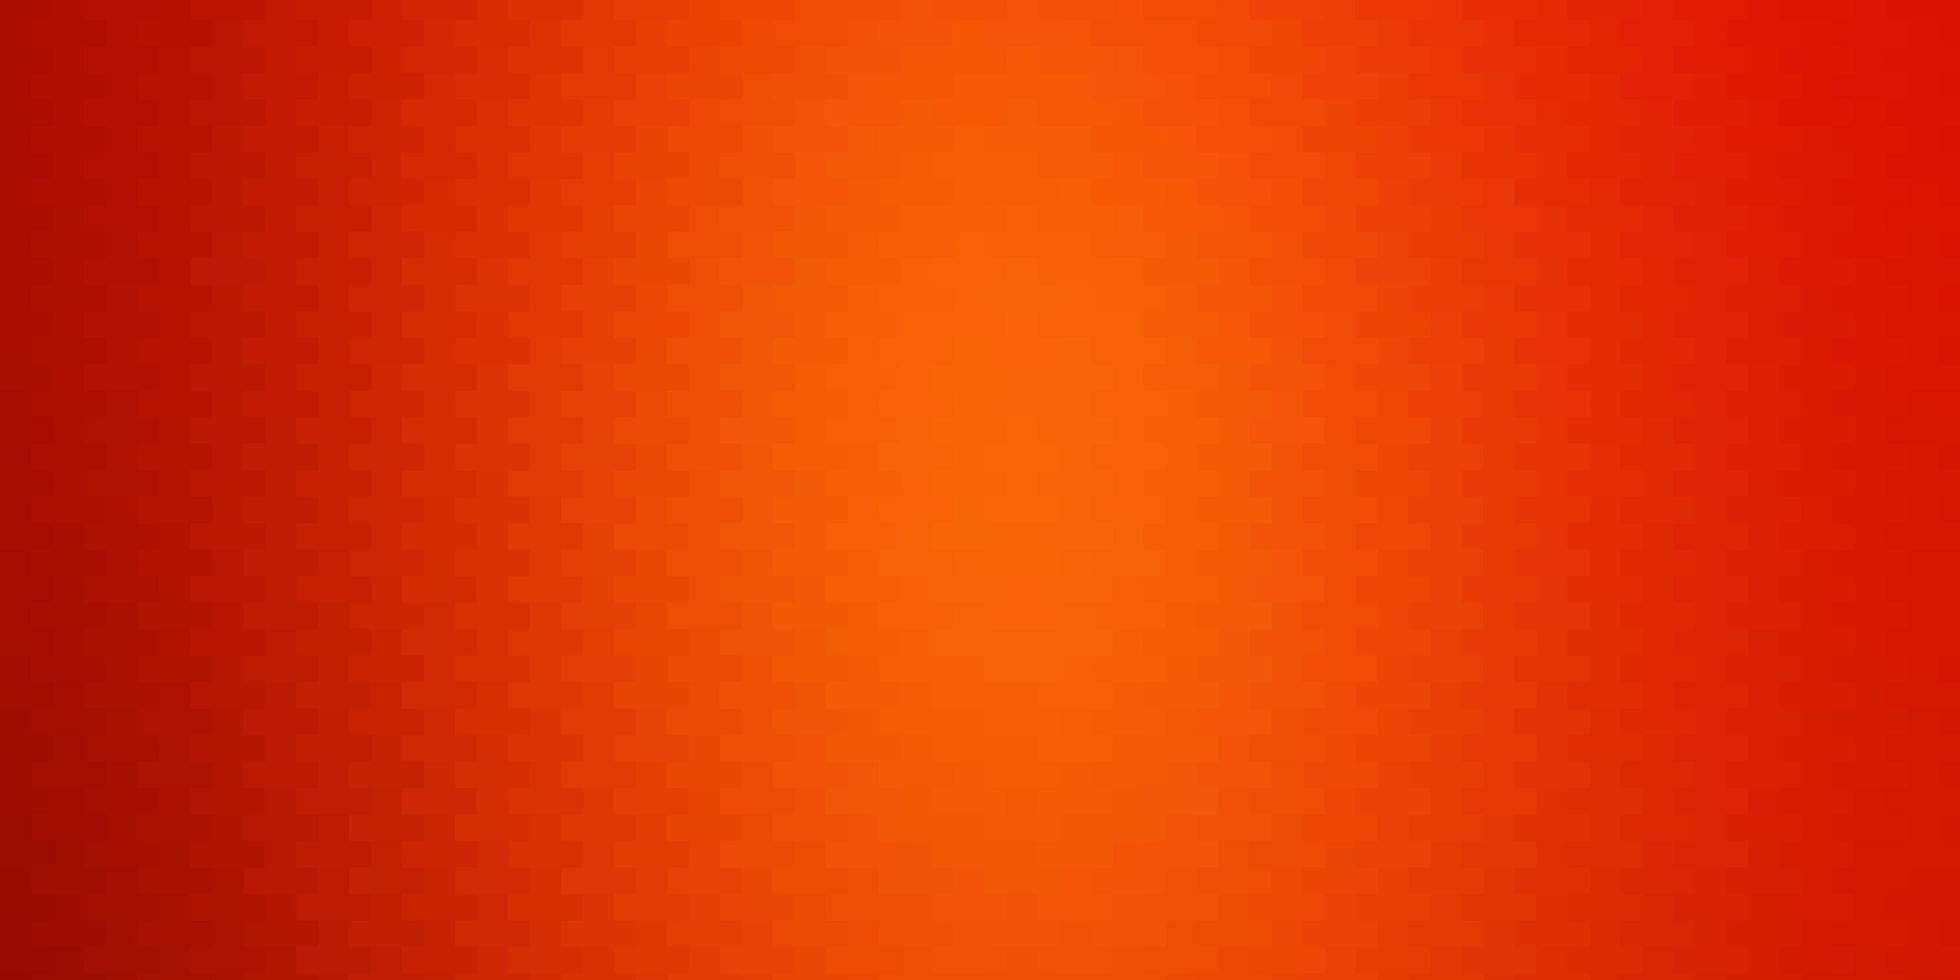 Light Red vector background with rectangles.